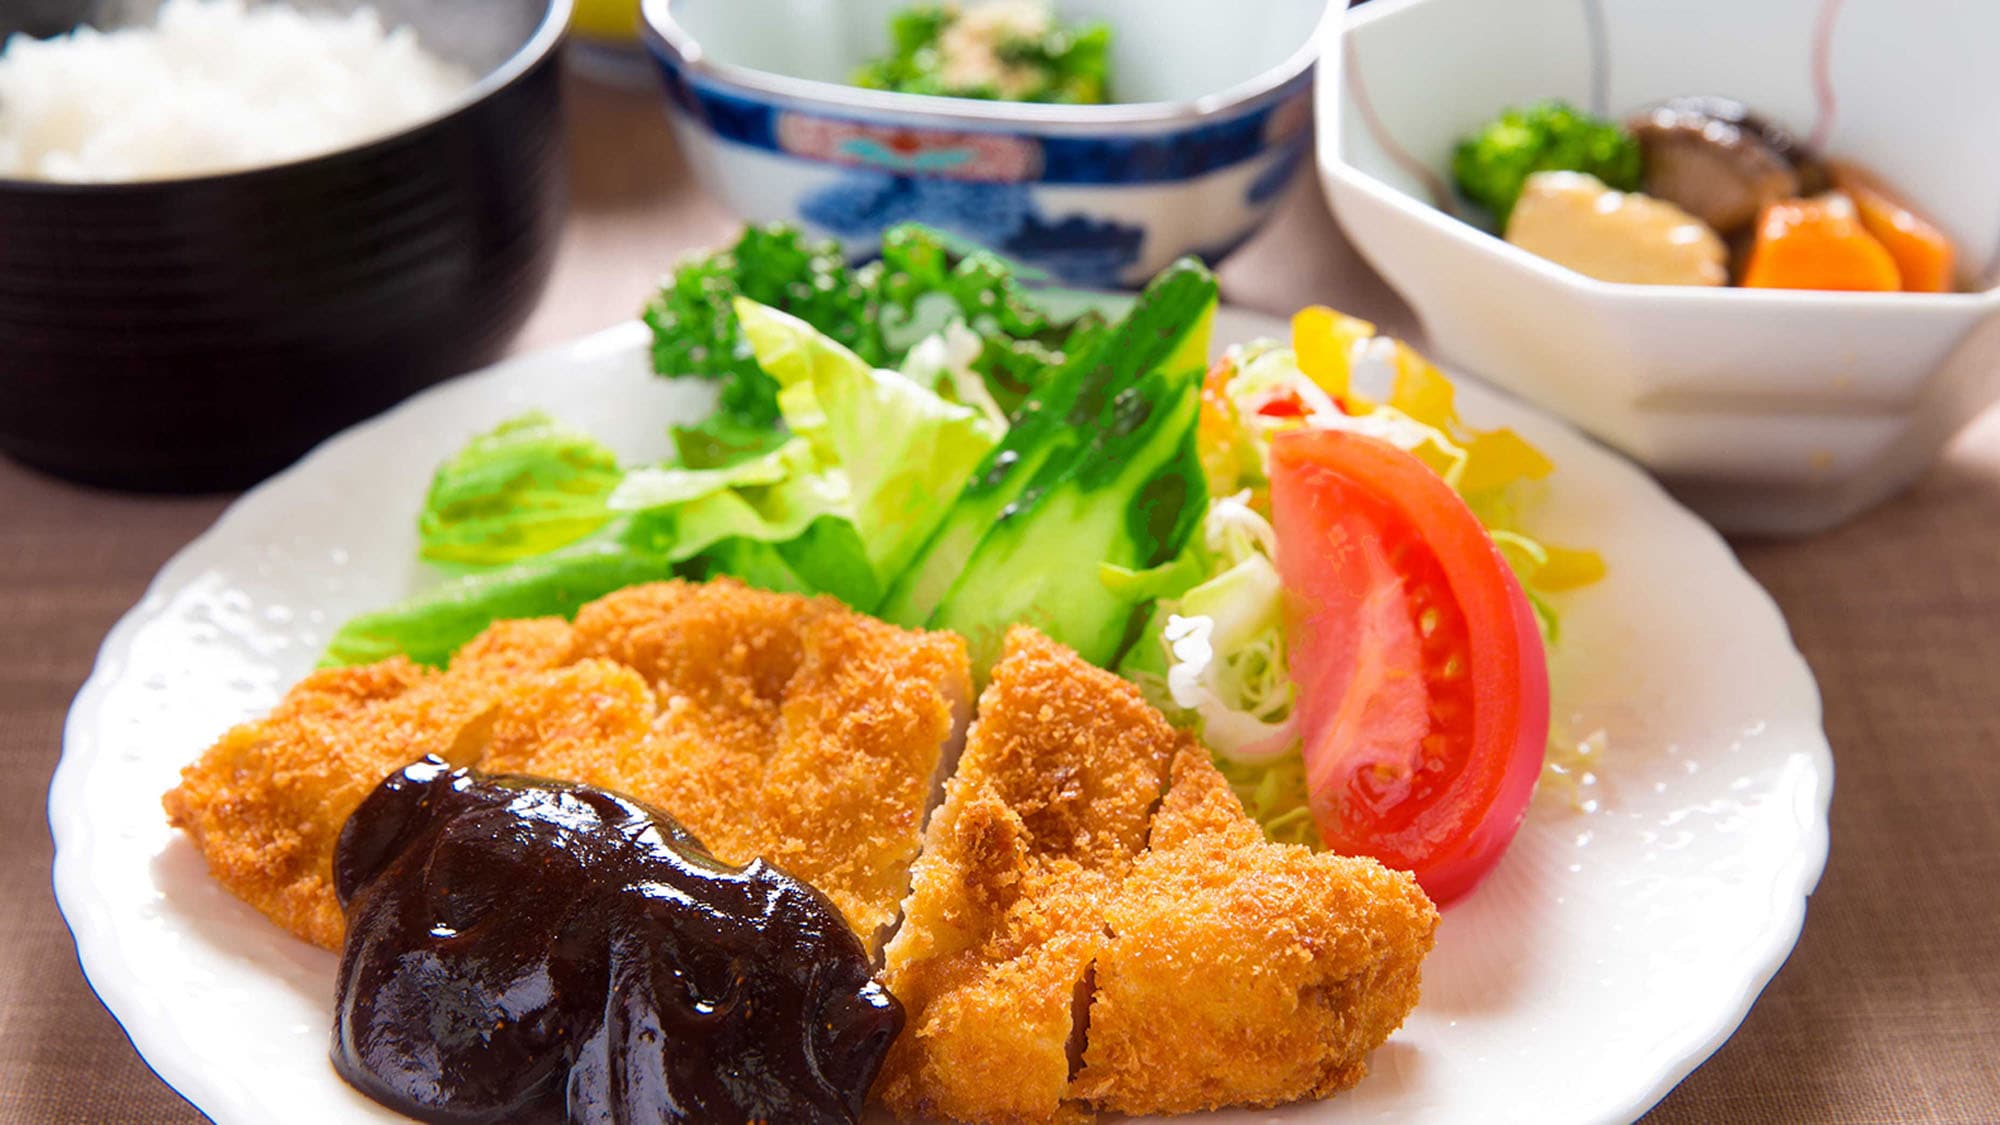 ■ Nagoya's famous "miso katsu" ■ Hatcho Miso's rich sauce goes well with juicy cutlet ◎!